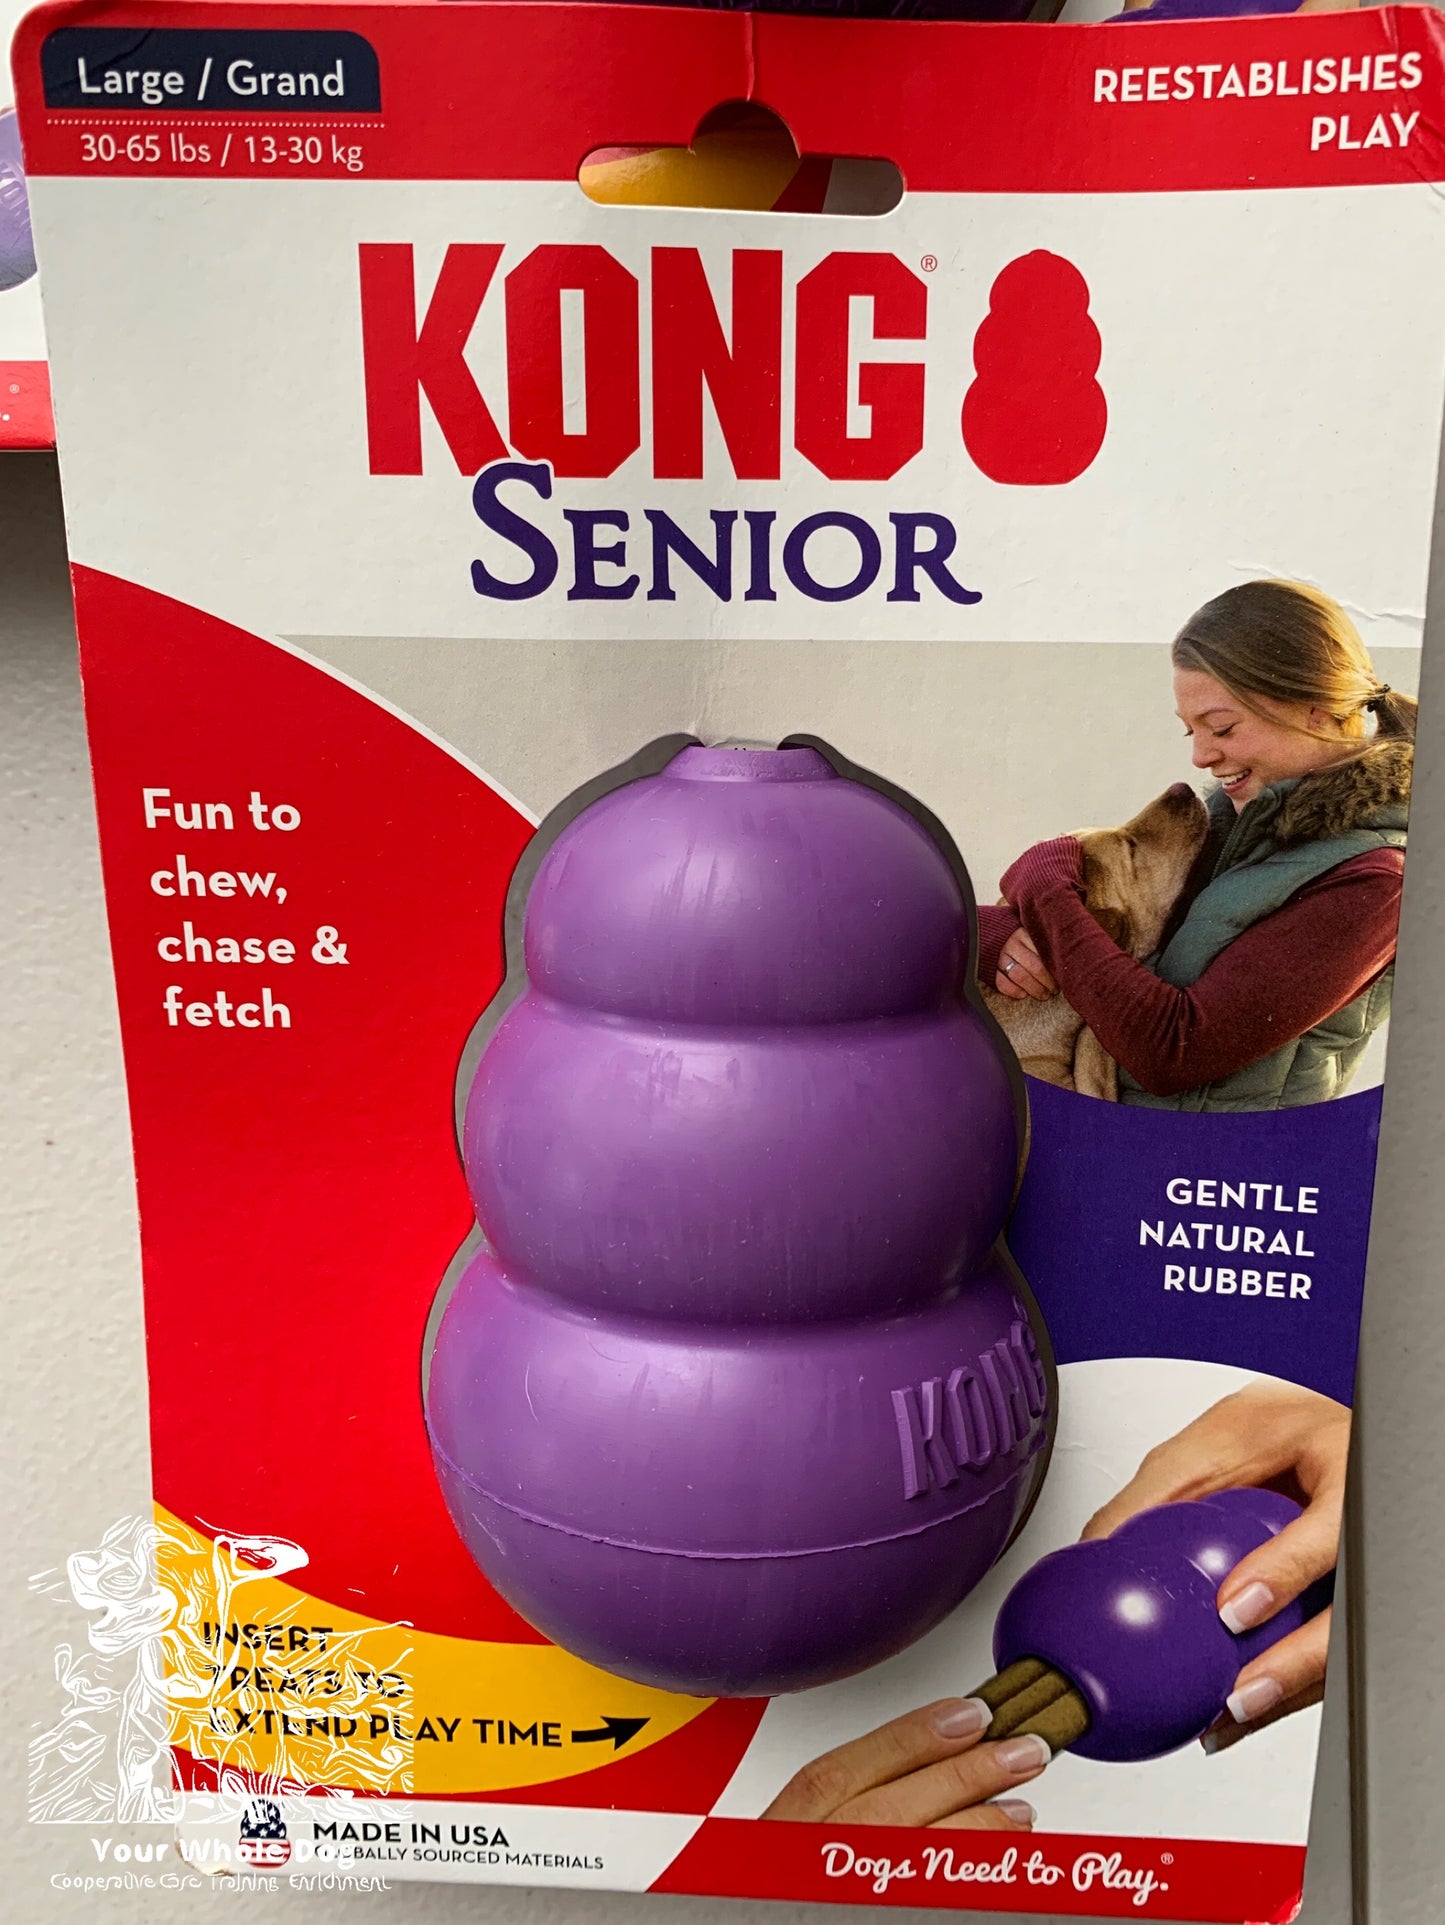 Your Whole Dog's KONG Classic Senior dog toy in purple packaging.